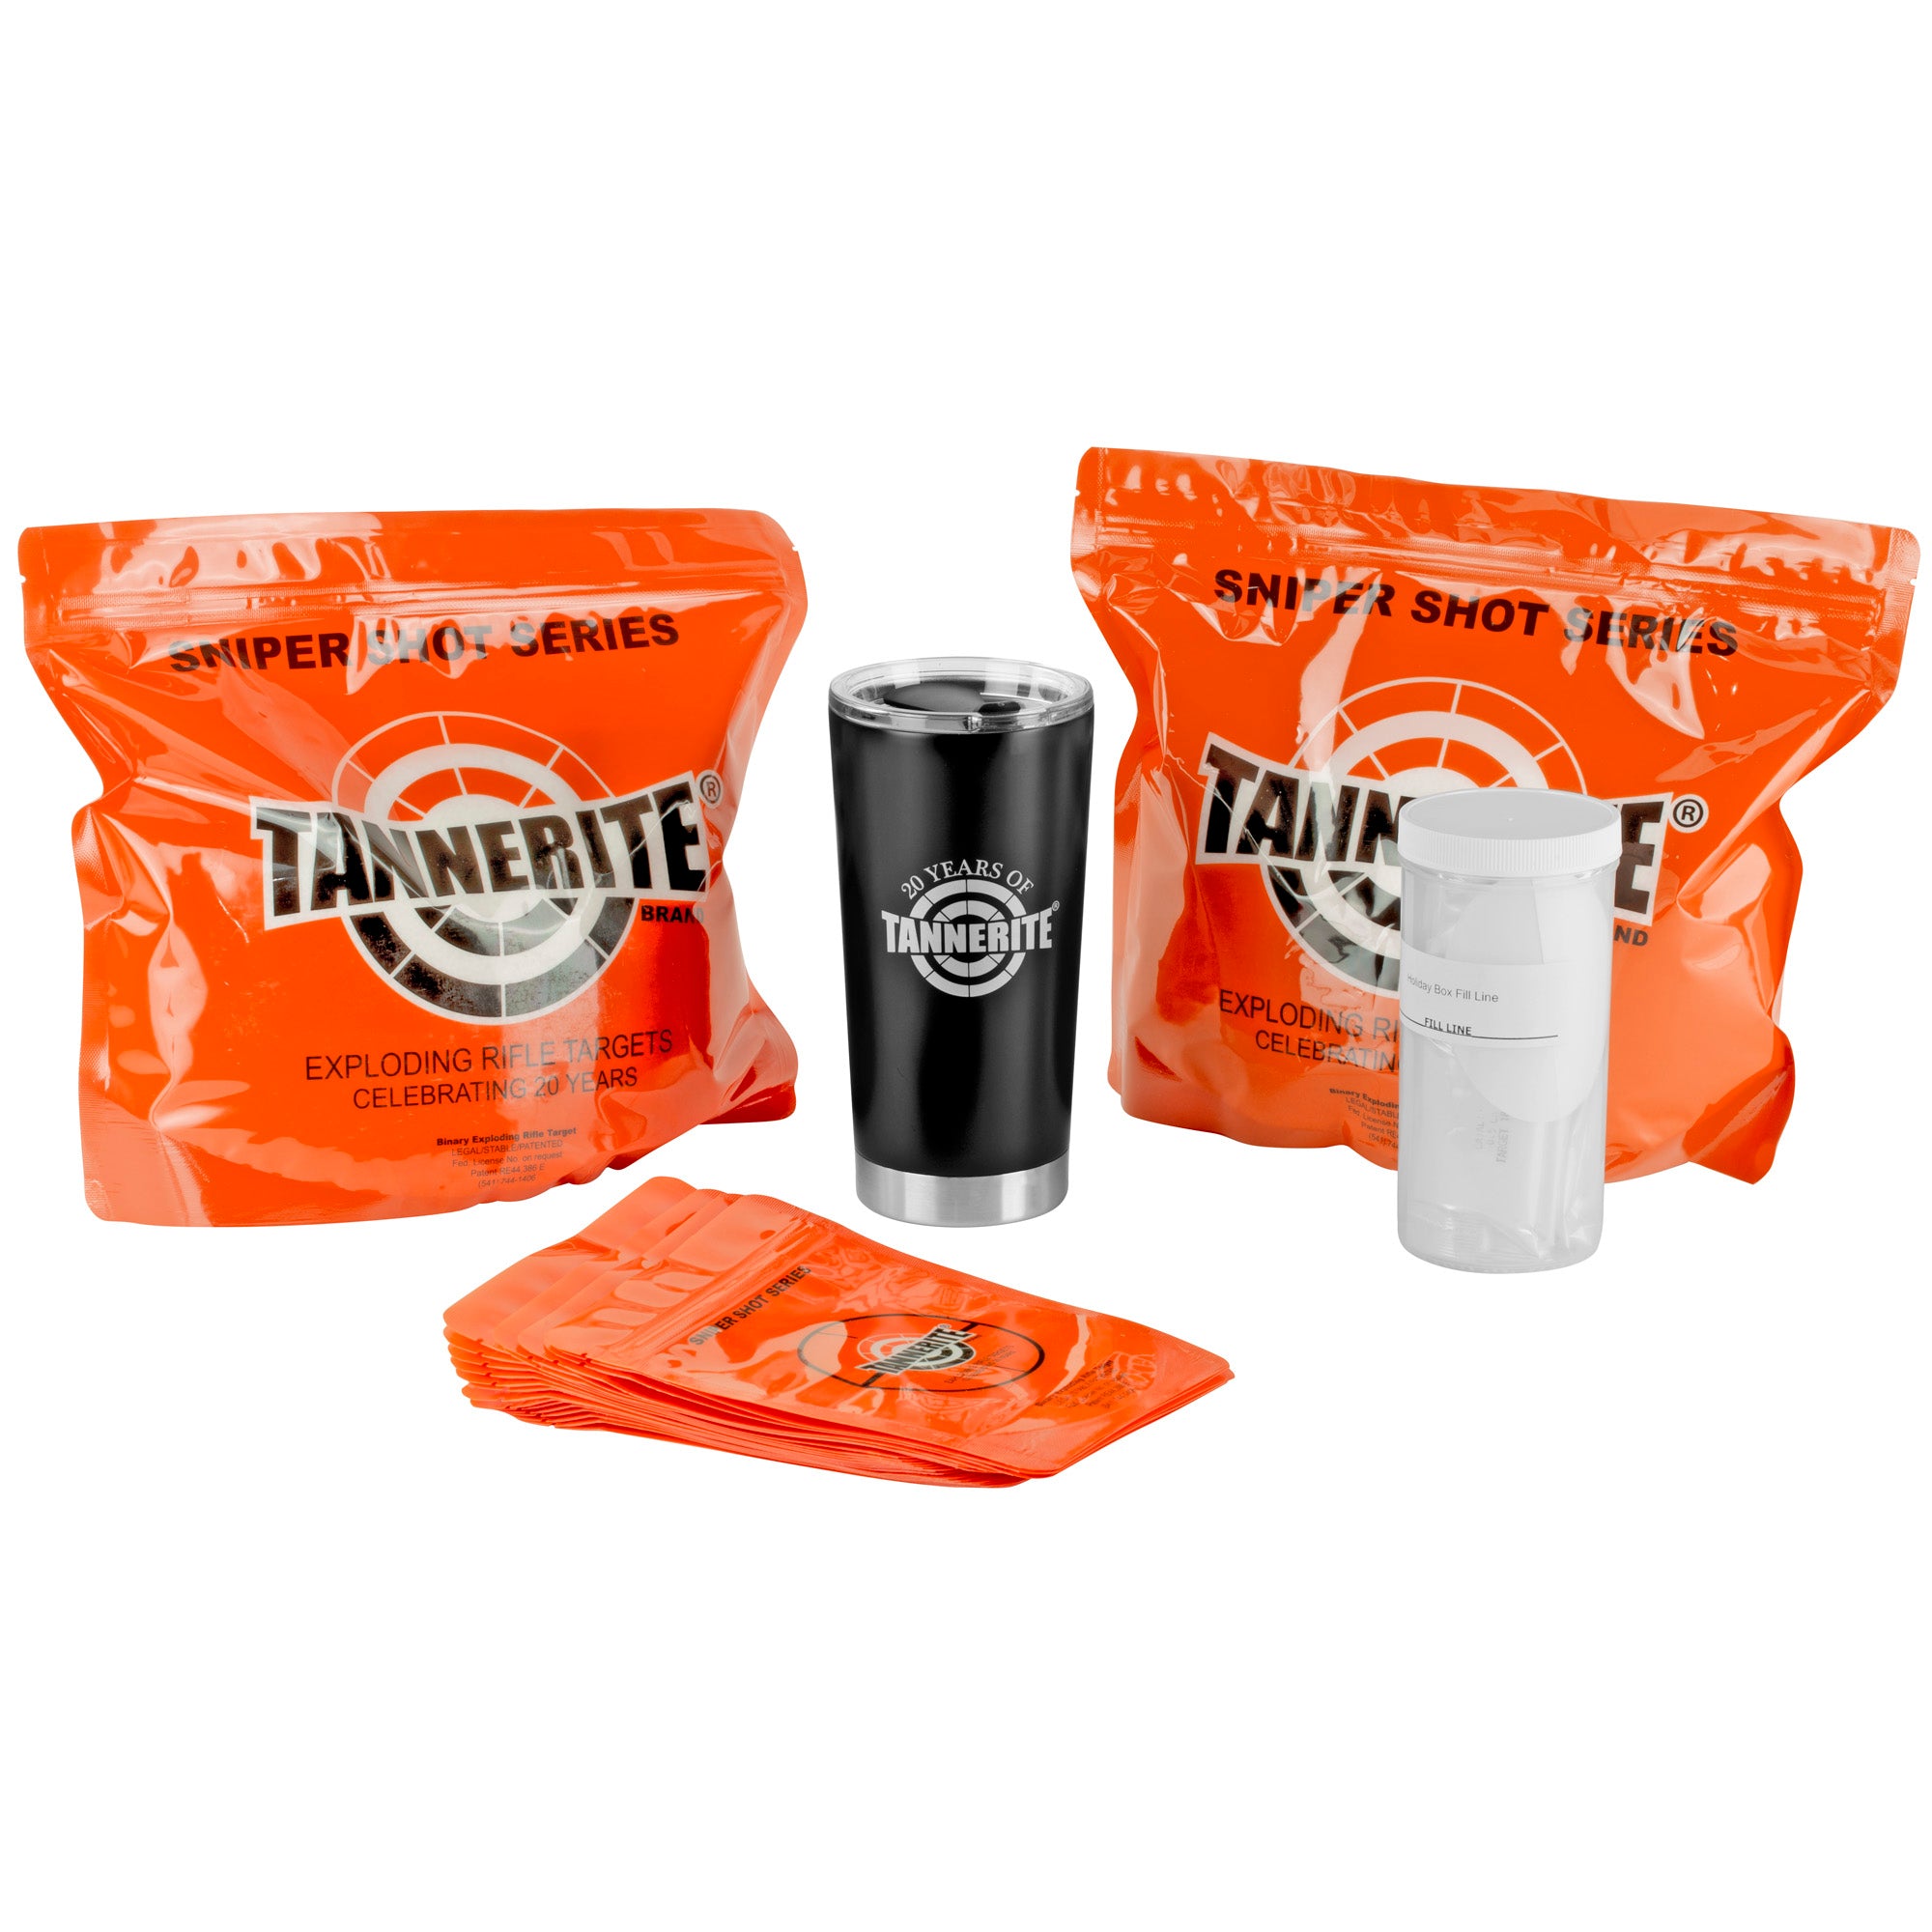 Tannerite, Sporting & Outdoor